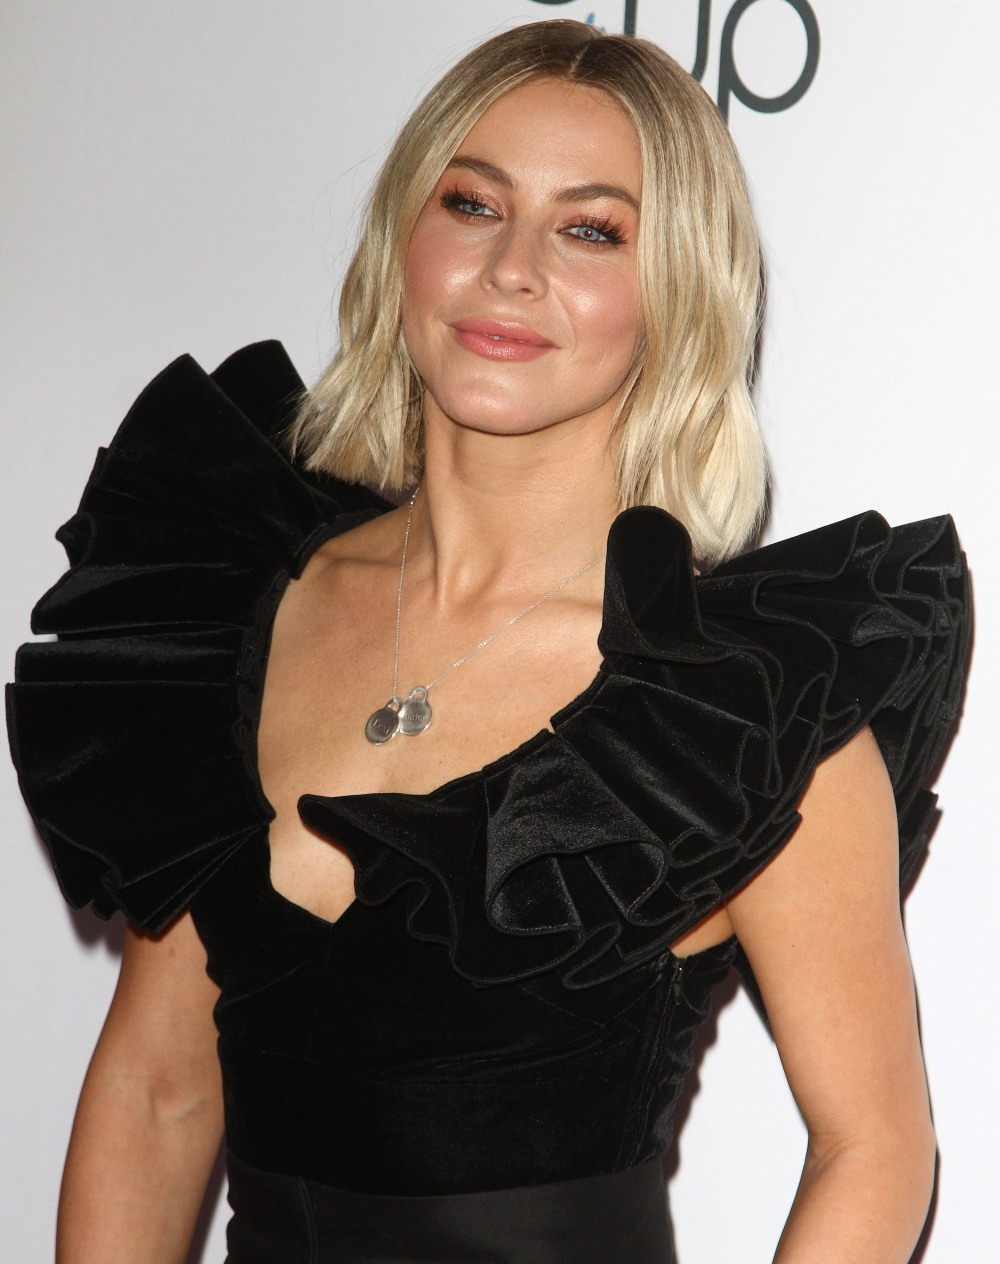 Julianne Hough attends The 2nd Annual Girl Up Girlhero Awards in Los Angeles on Sunday, October 13th, 2019